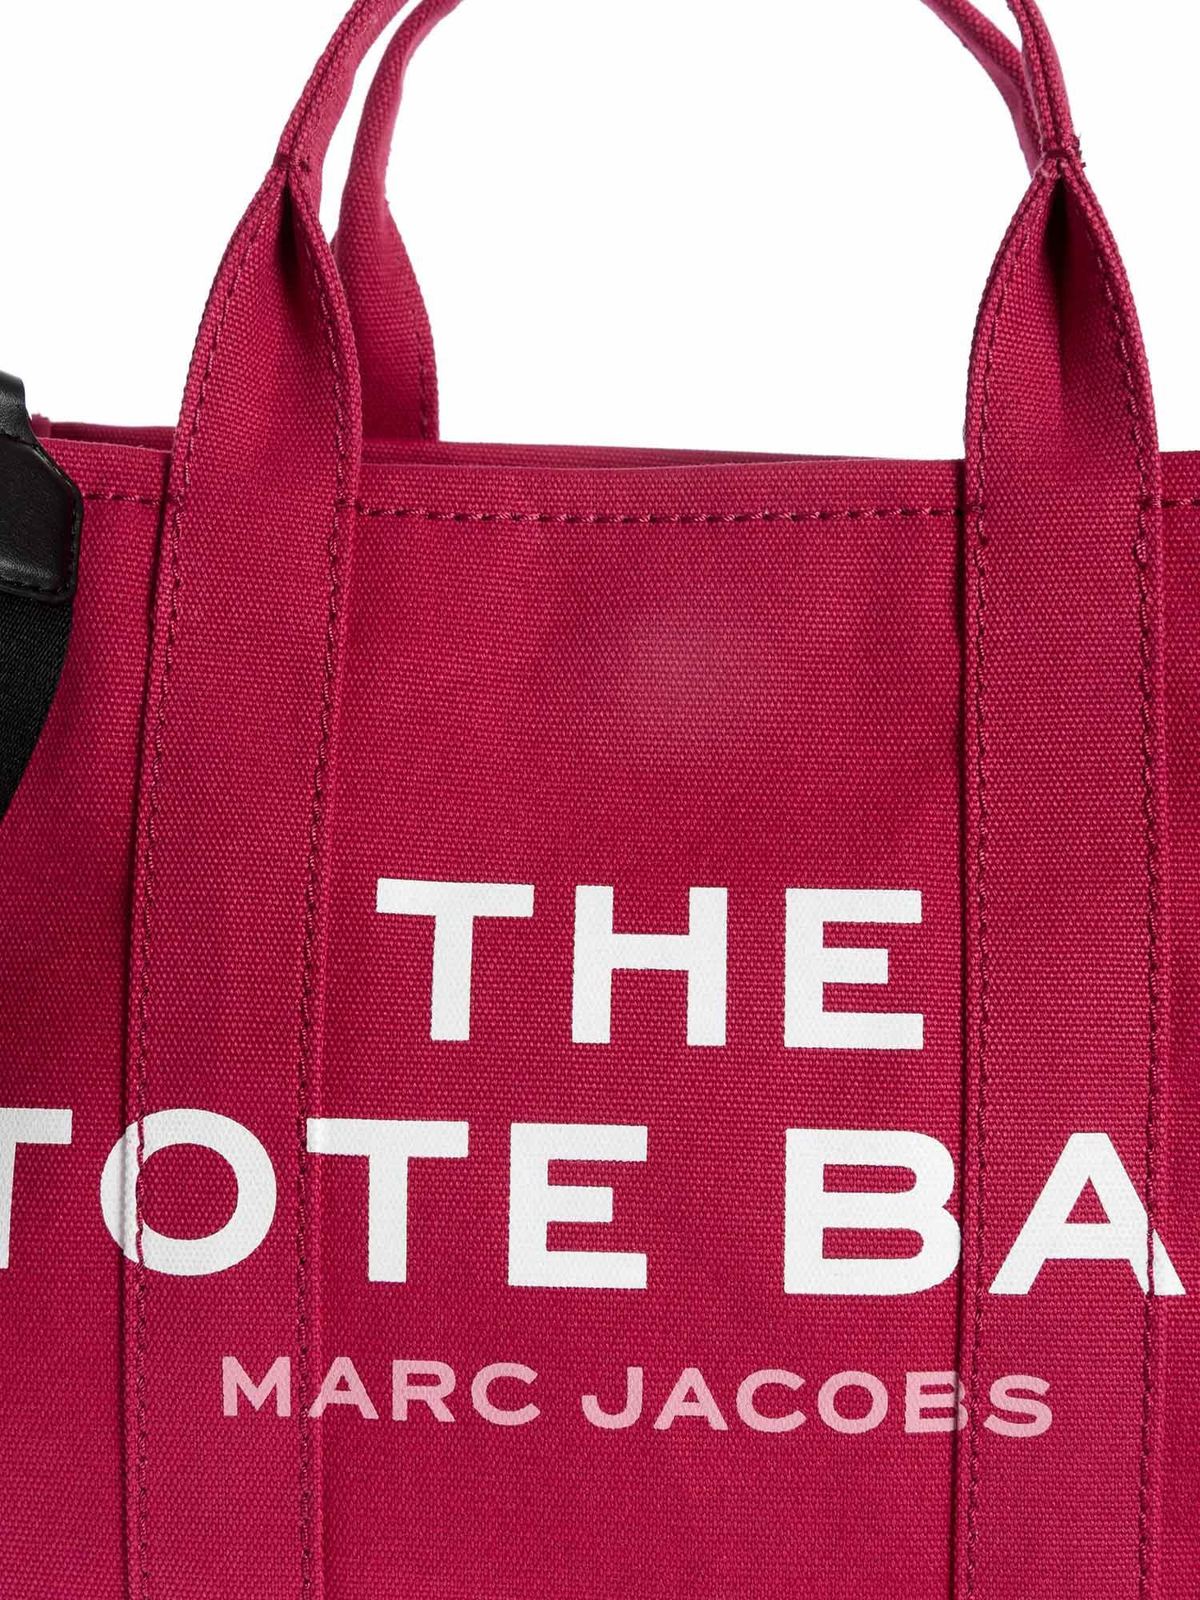 Totes bags Marc Jacobs - The Traveler tote bag in red - M0016161601